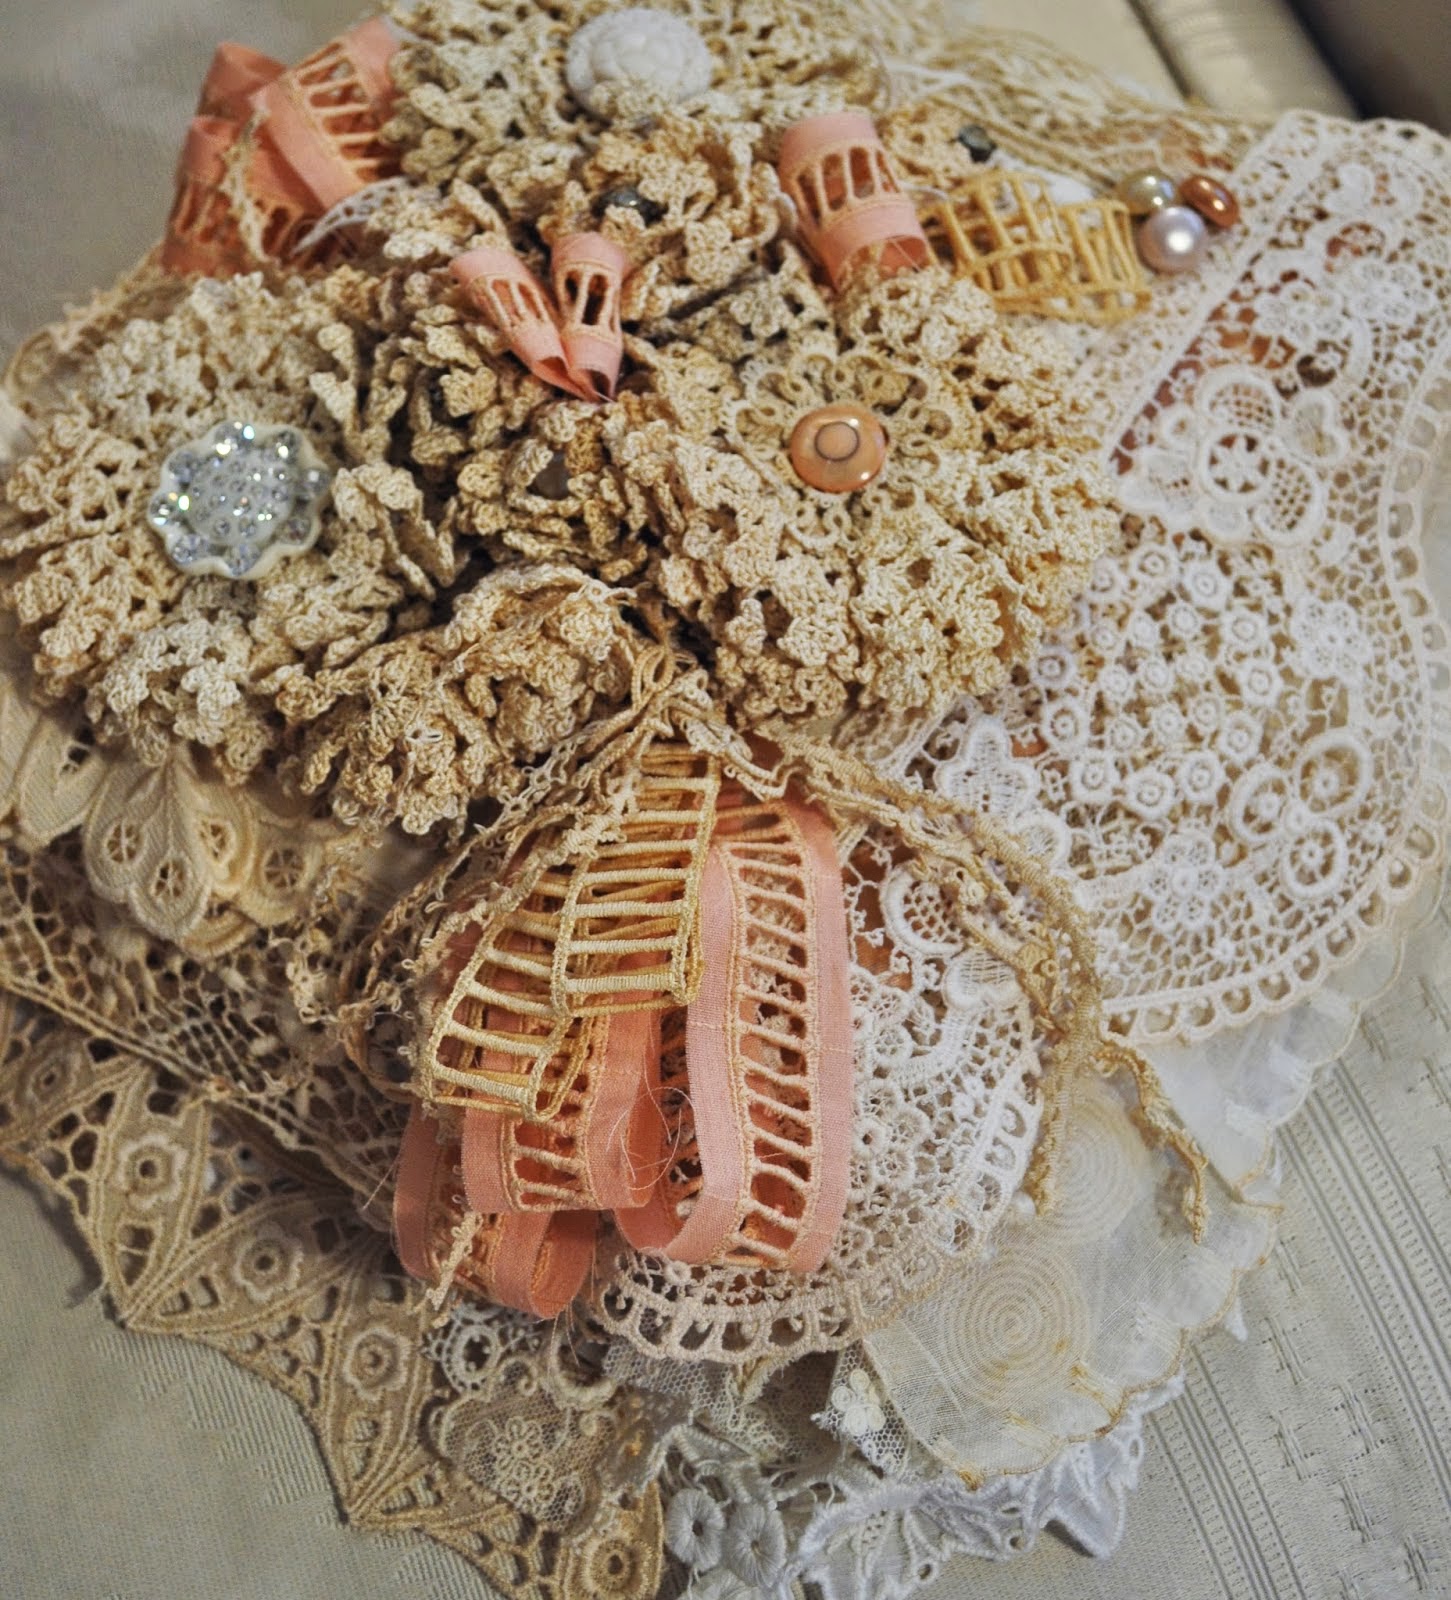 Doni's gorgeous Lace Book